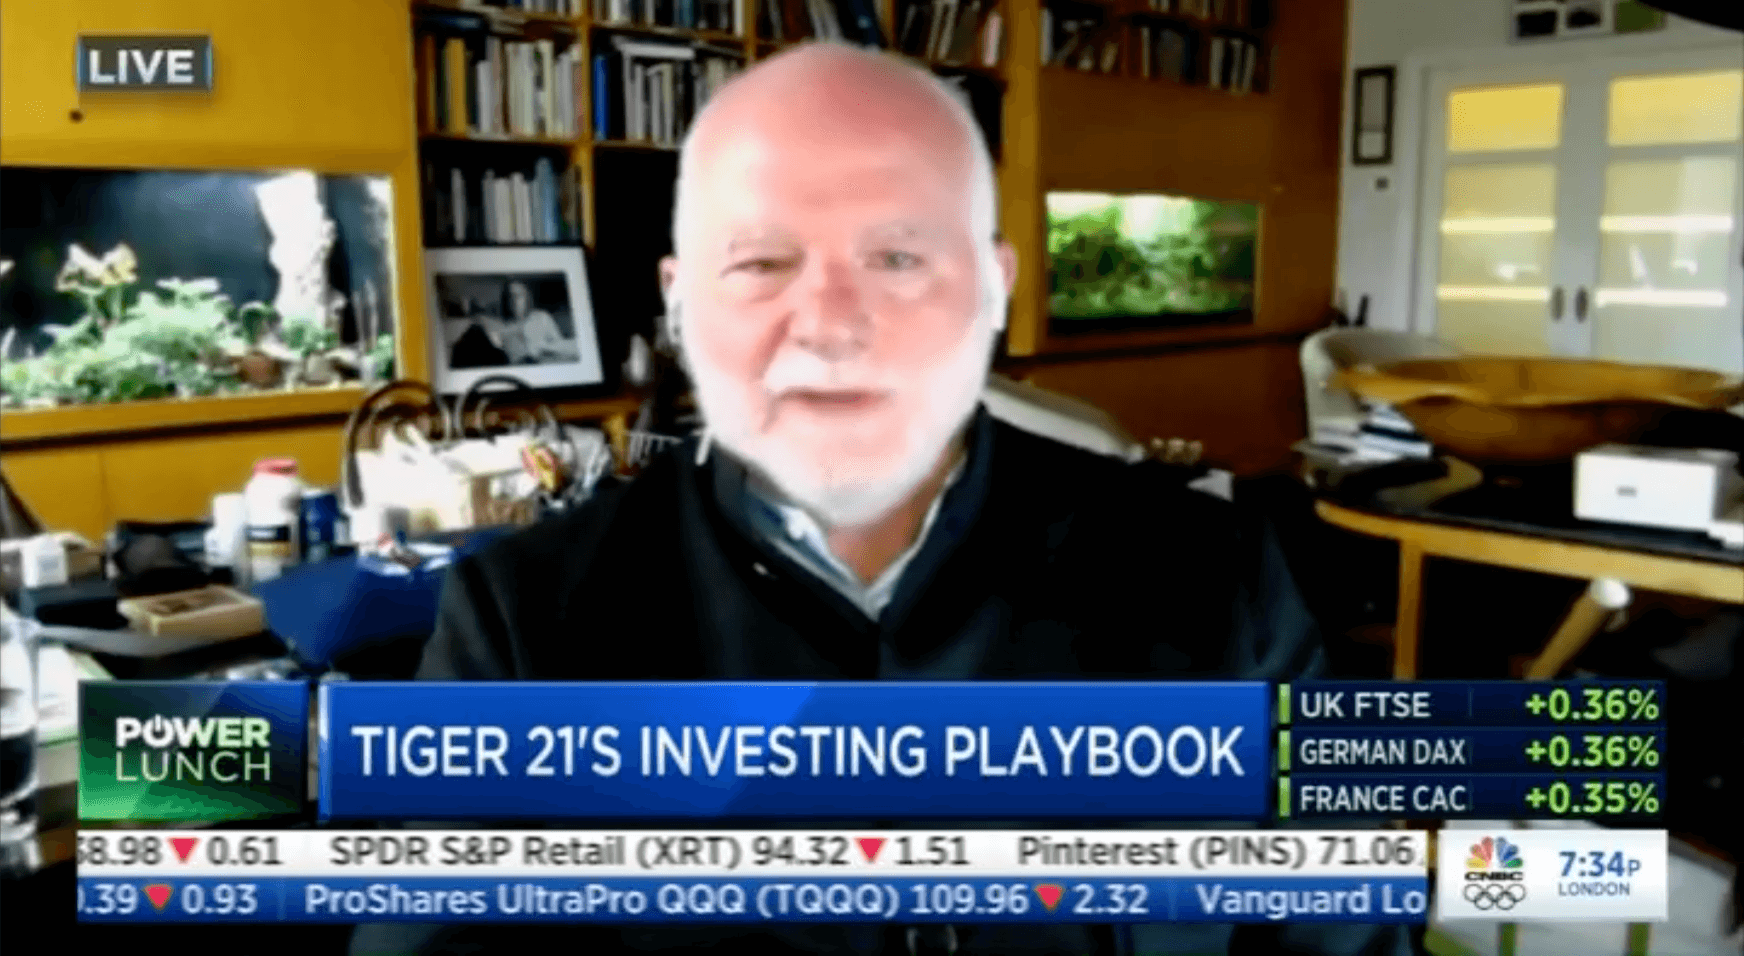 Public Equities, Real Estate, and Crypto: CNBC “Power Lunch” Interviews TIGER 21 Founder